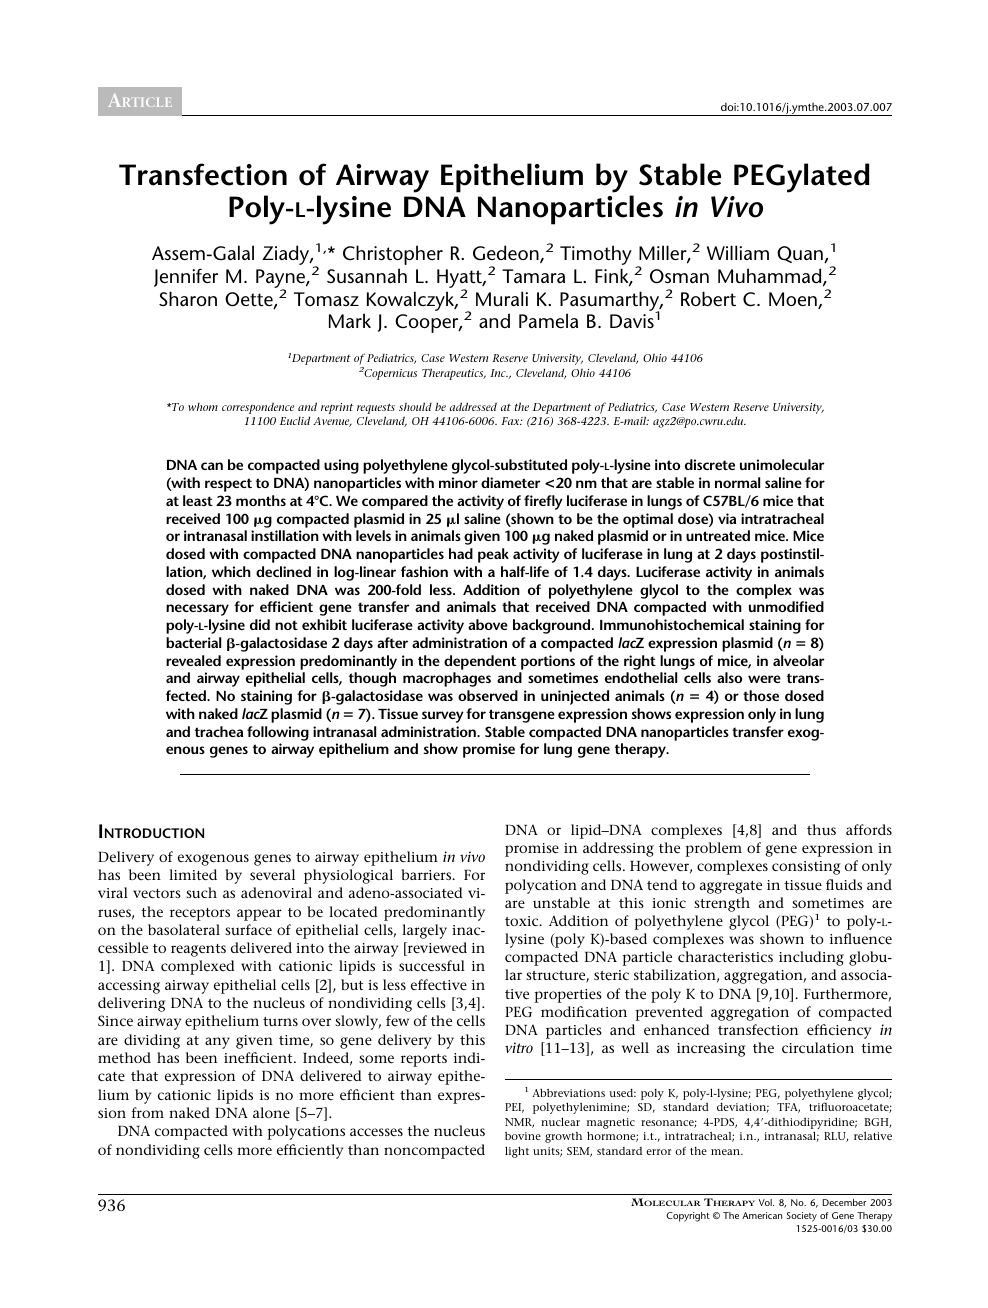 Transfection Of Airway Epithelium By Stable Pegylated Poly Lysine Dna Nanoparticles In Vivo Topic Of Research Paper In Biological Sciences Download Scholarly Article Pdf And Read For Free On Cyberleninka Open Science